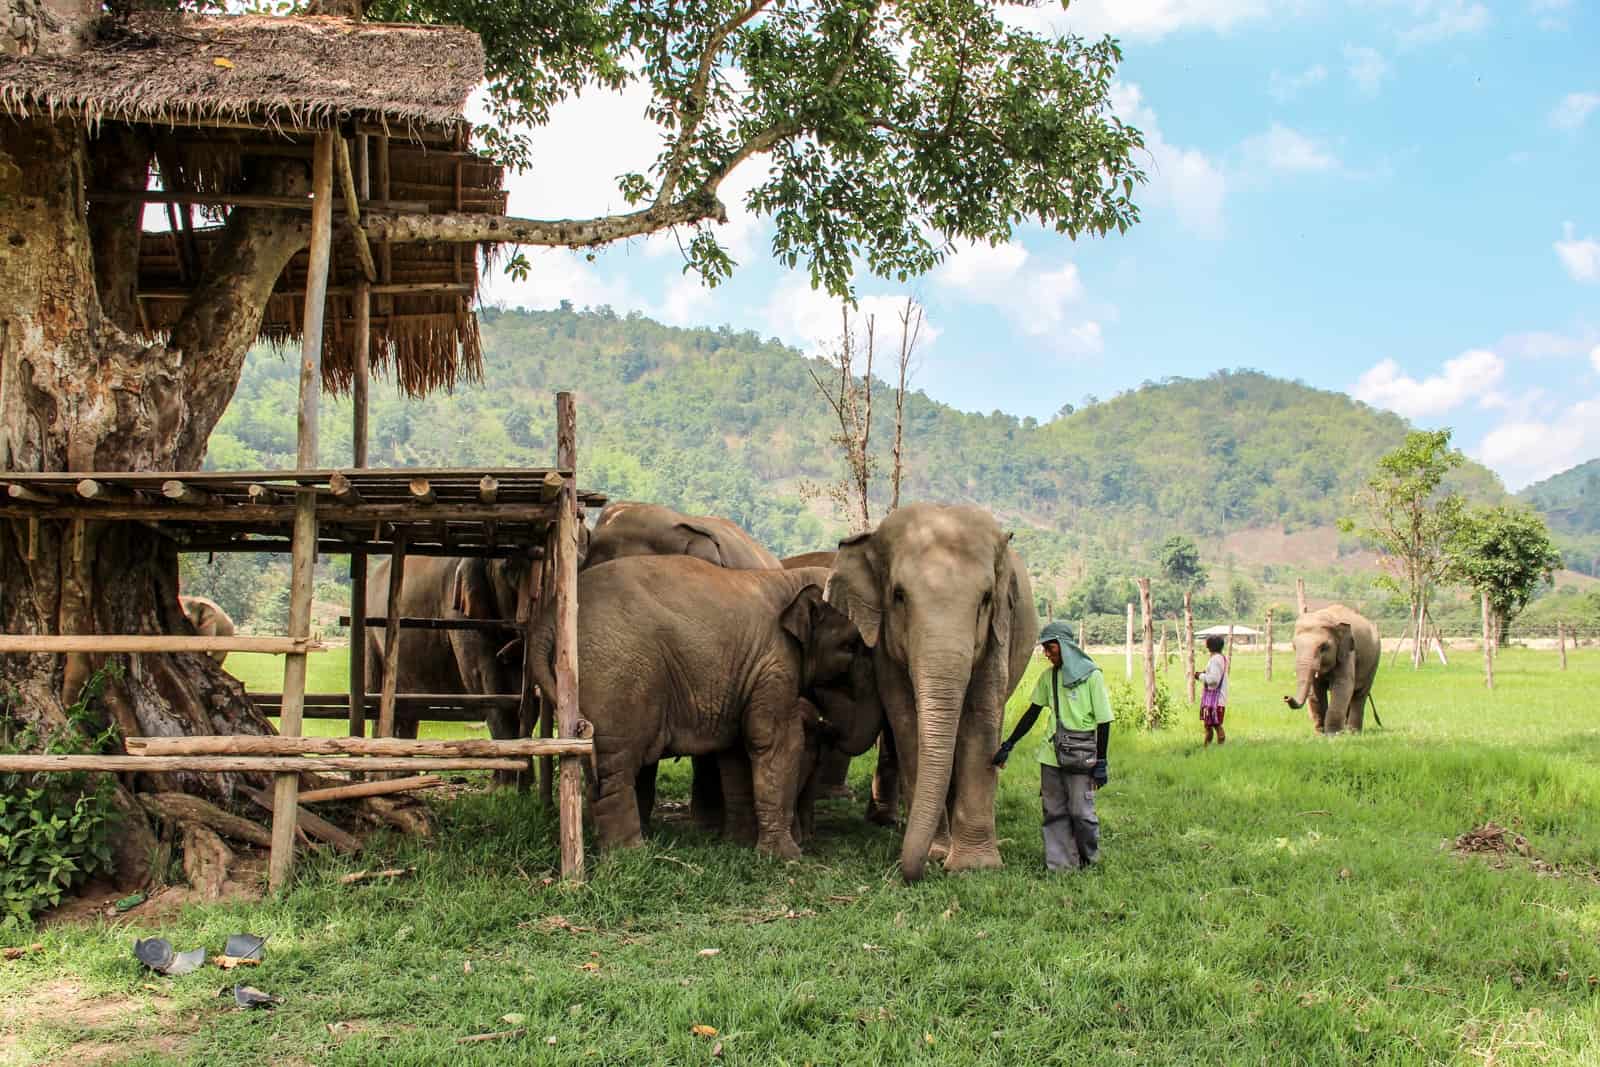 A Sanctuary worker tends to Elephants in Thailand at the Elephant Nature Park conservation project.